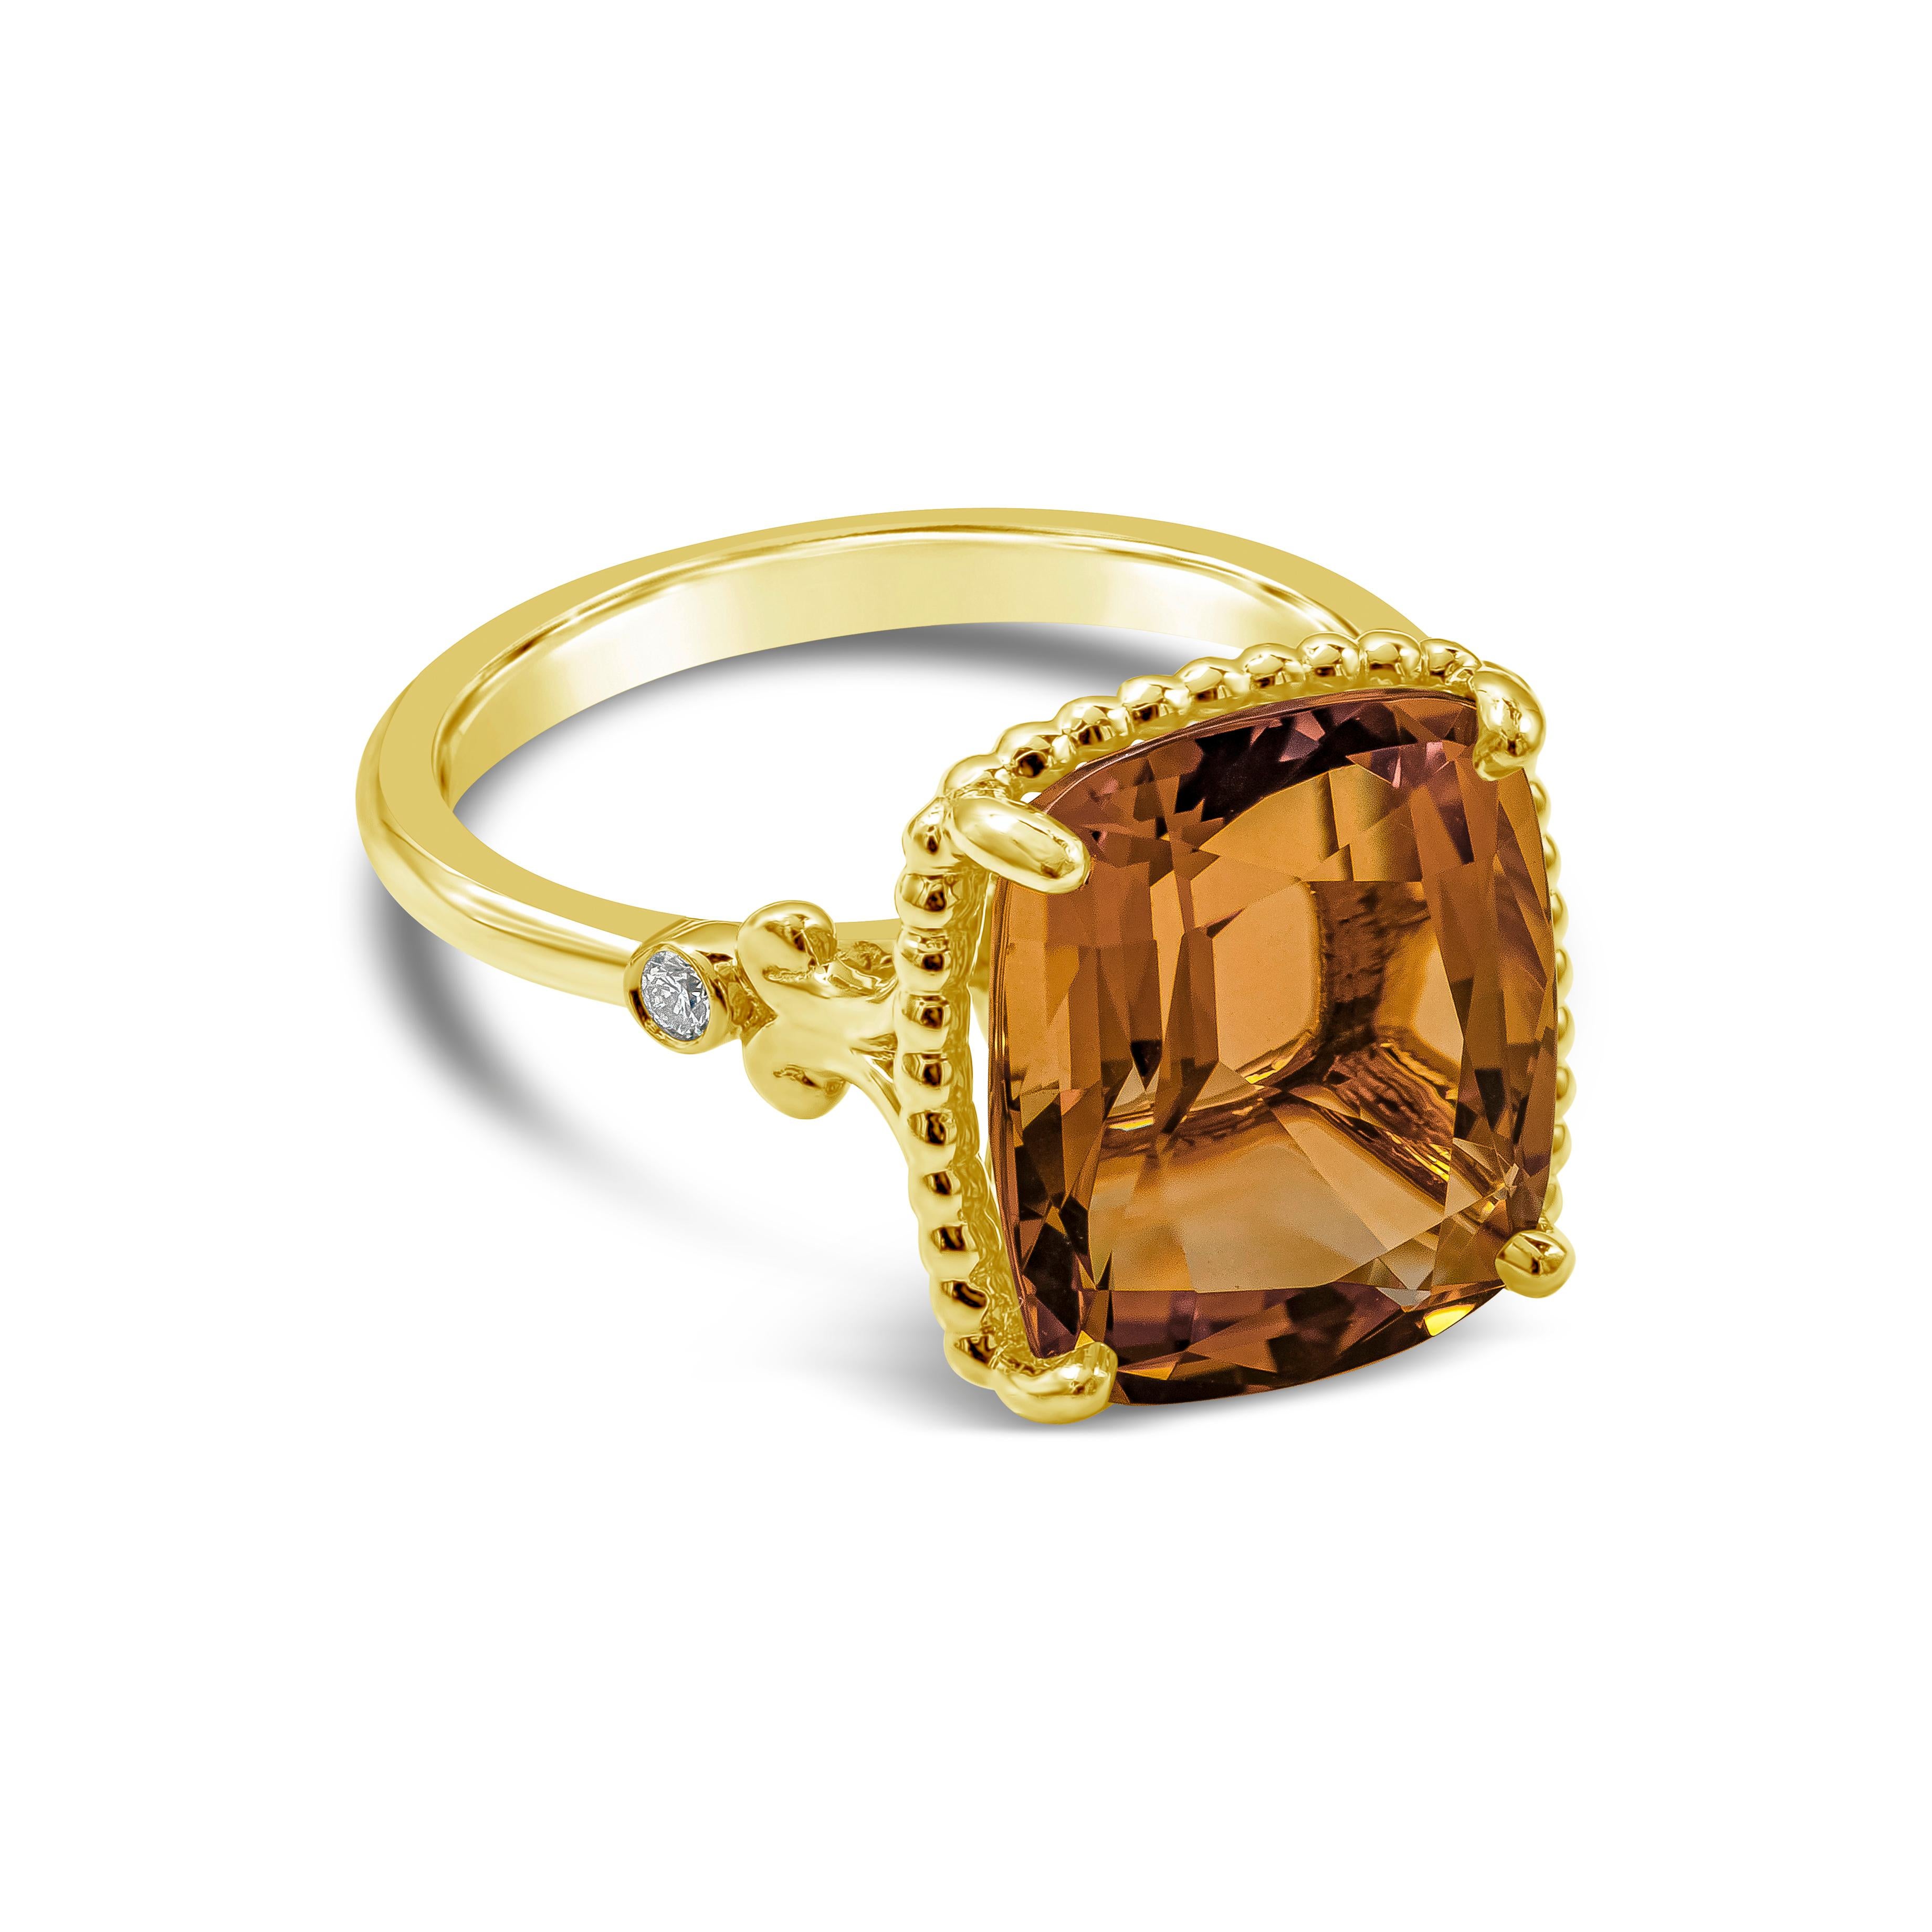 A beautiful cocktail ring showcasing a 6.50 carat cushion cut citrine, set in an 18k yellow gold basket and mounting. Band accented with diamonds on either side of the center stone. Comes with original Tiffany & Co. box.